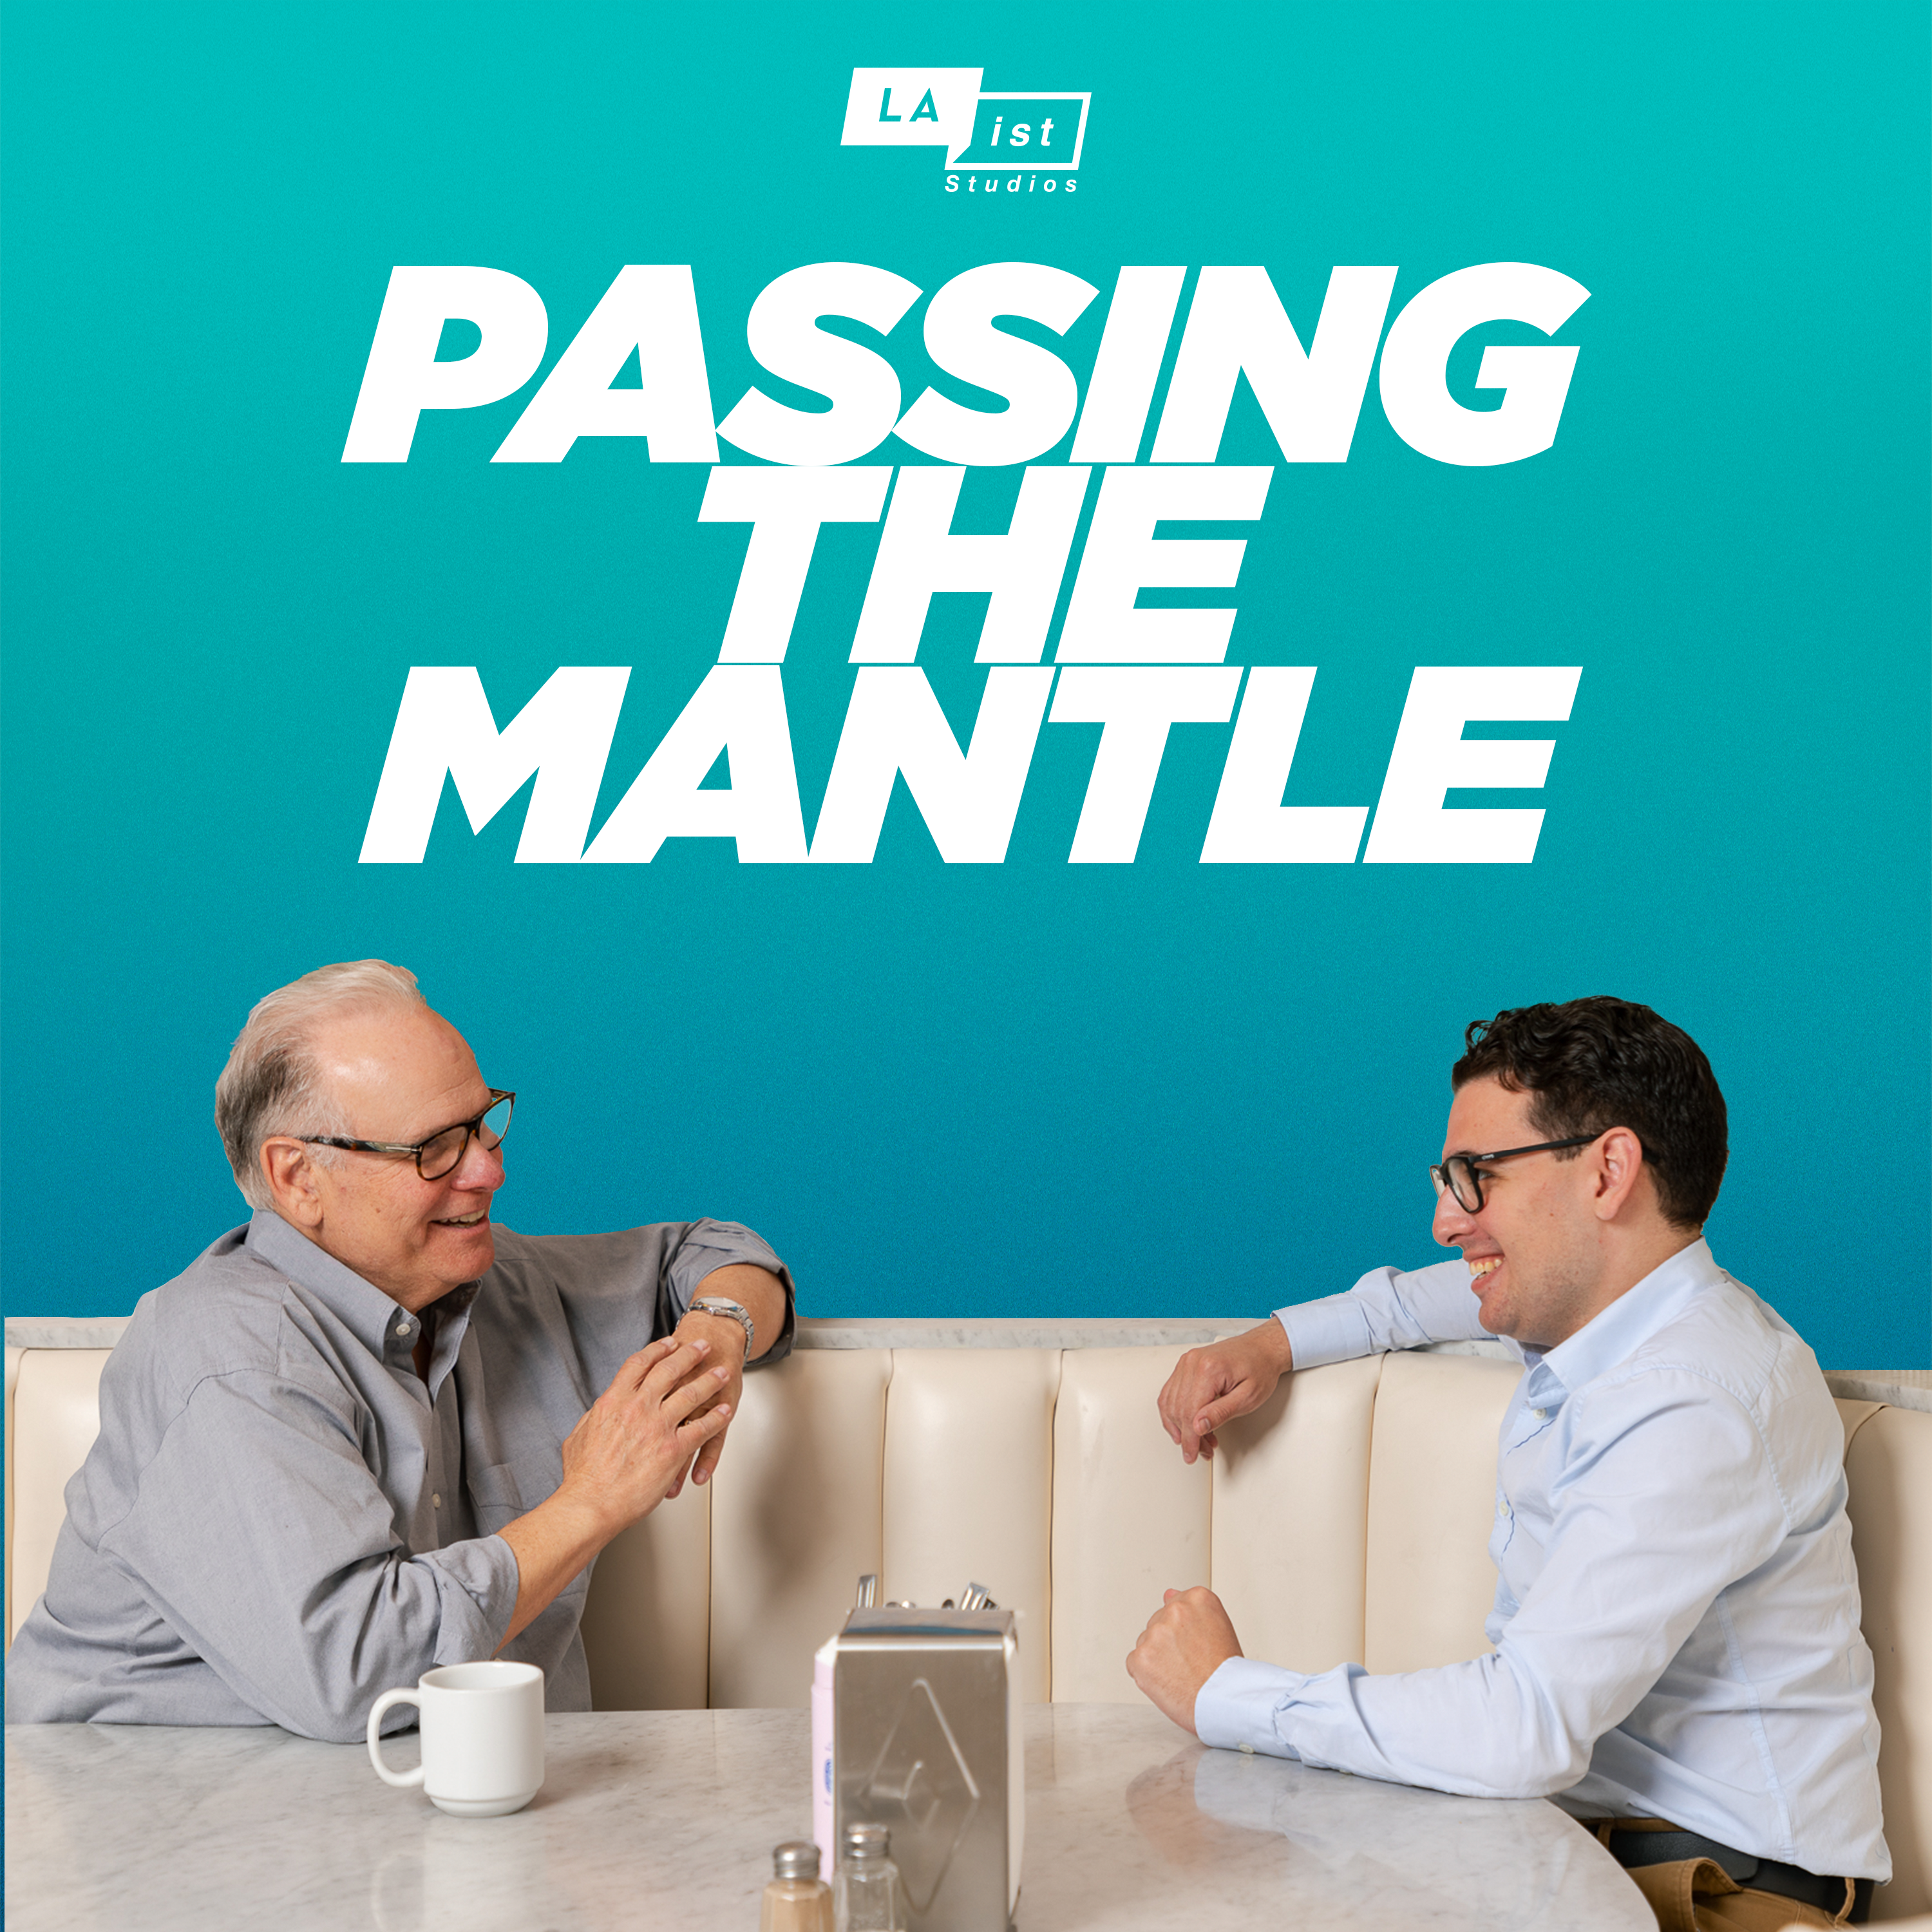 LAist Studios presents Passing The Mantle: Has our relationship with work changed over the years?